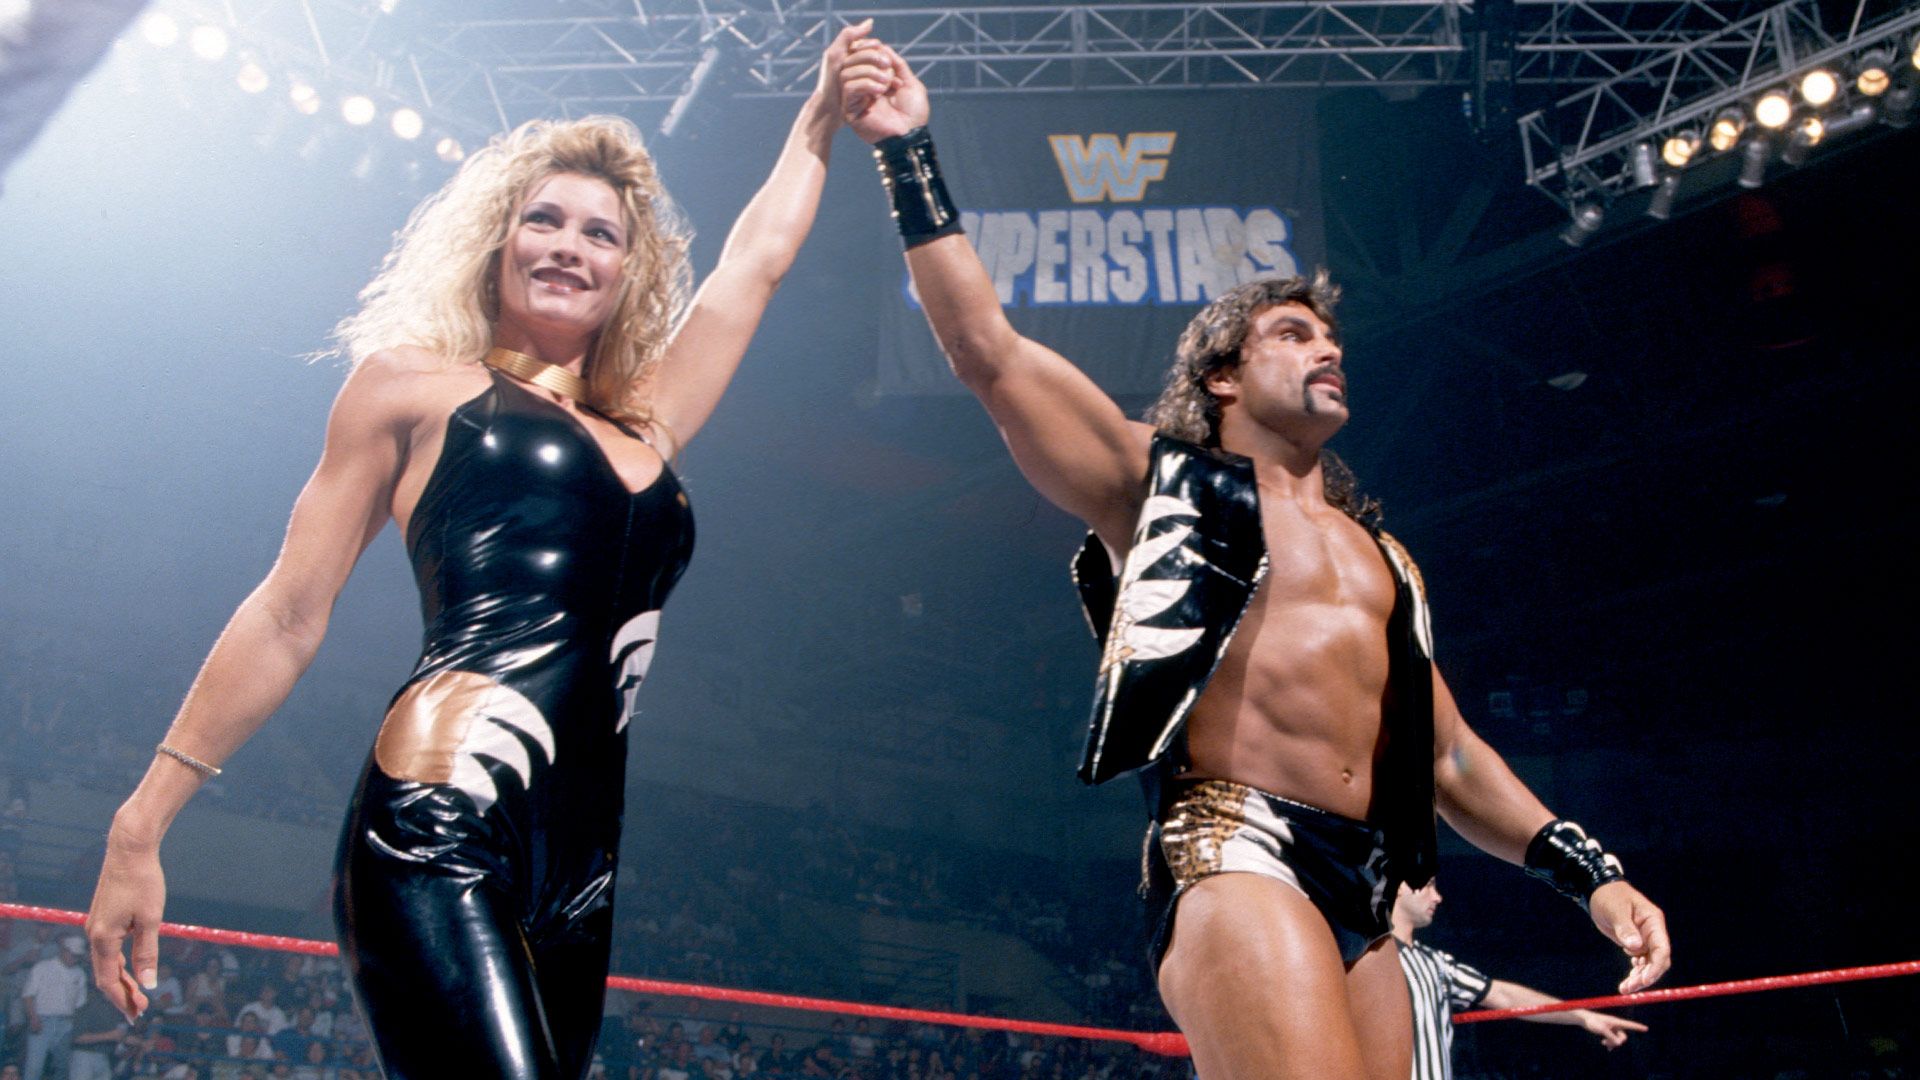 Sable and Marc Mero